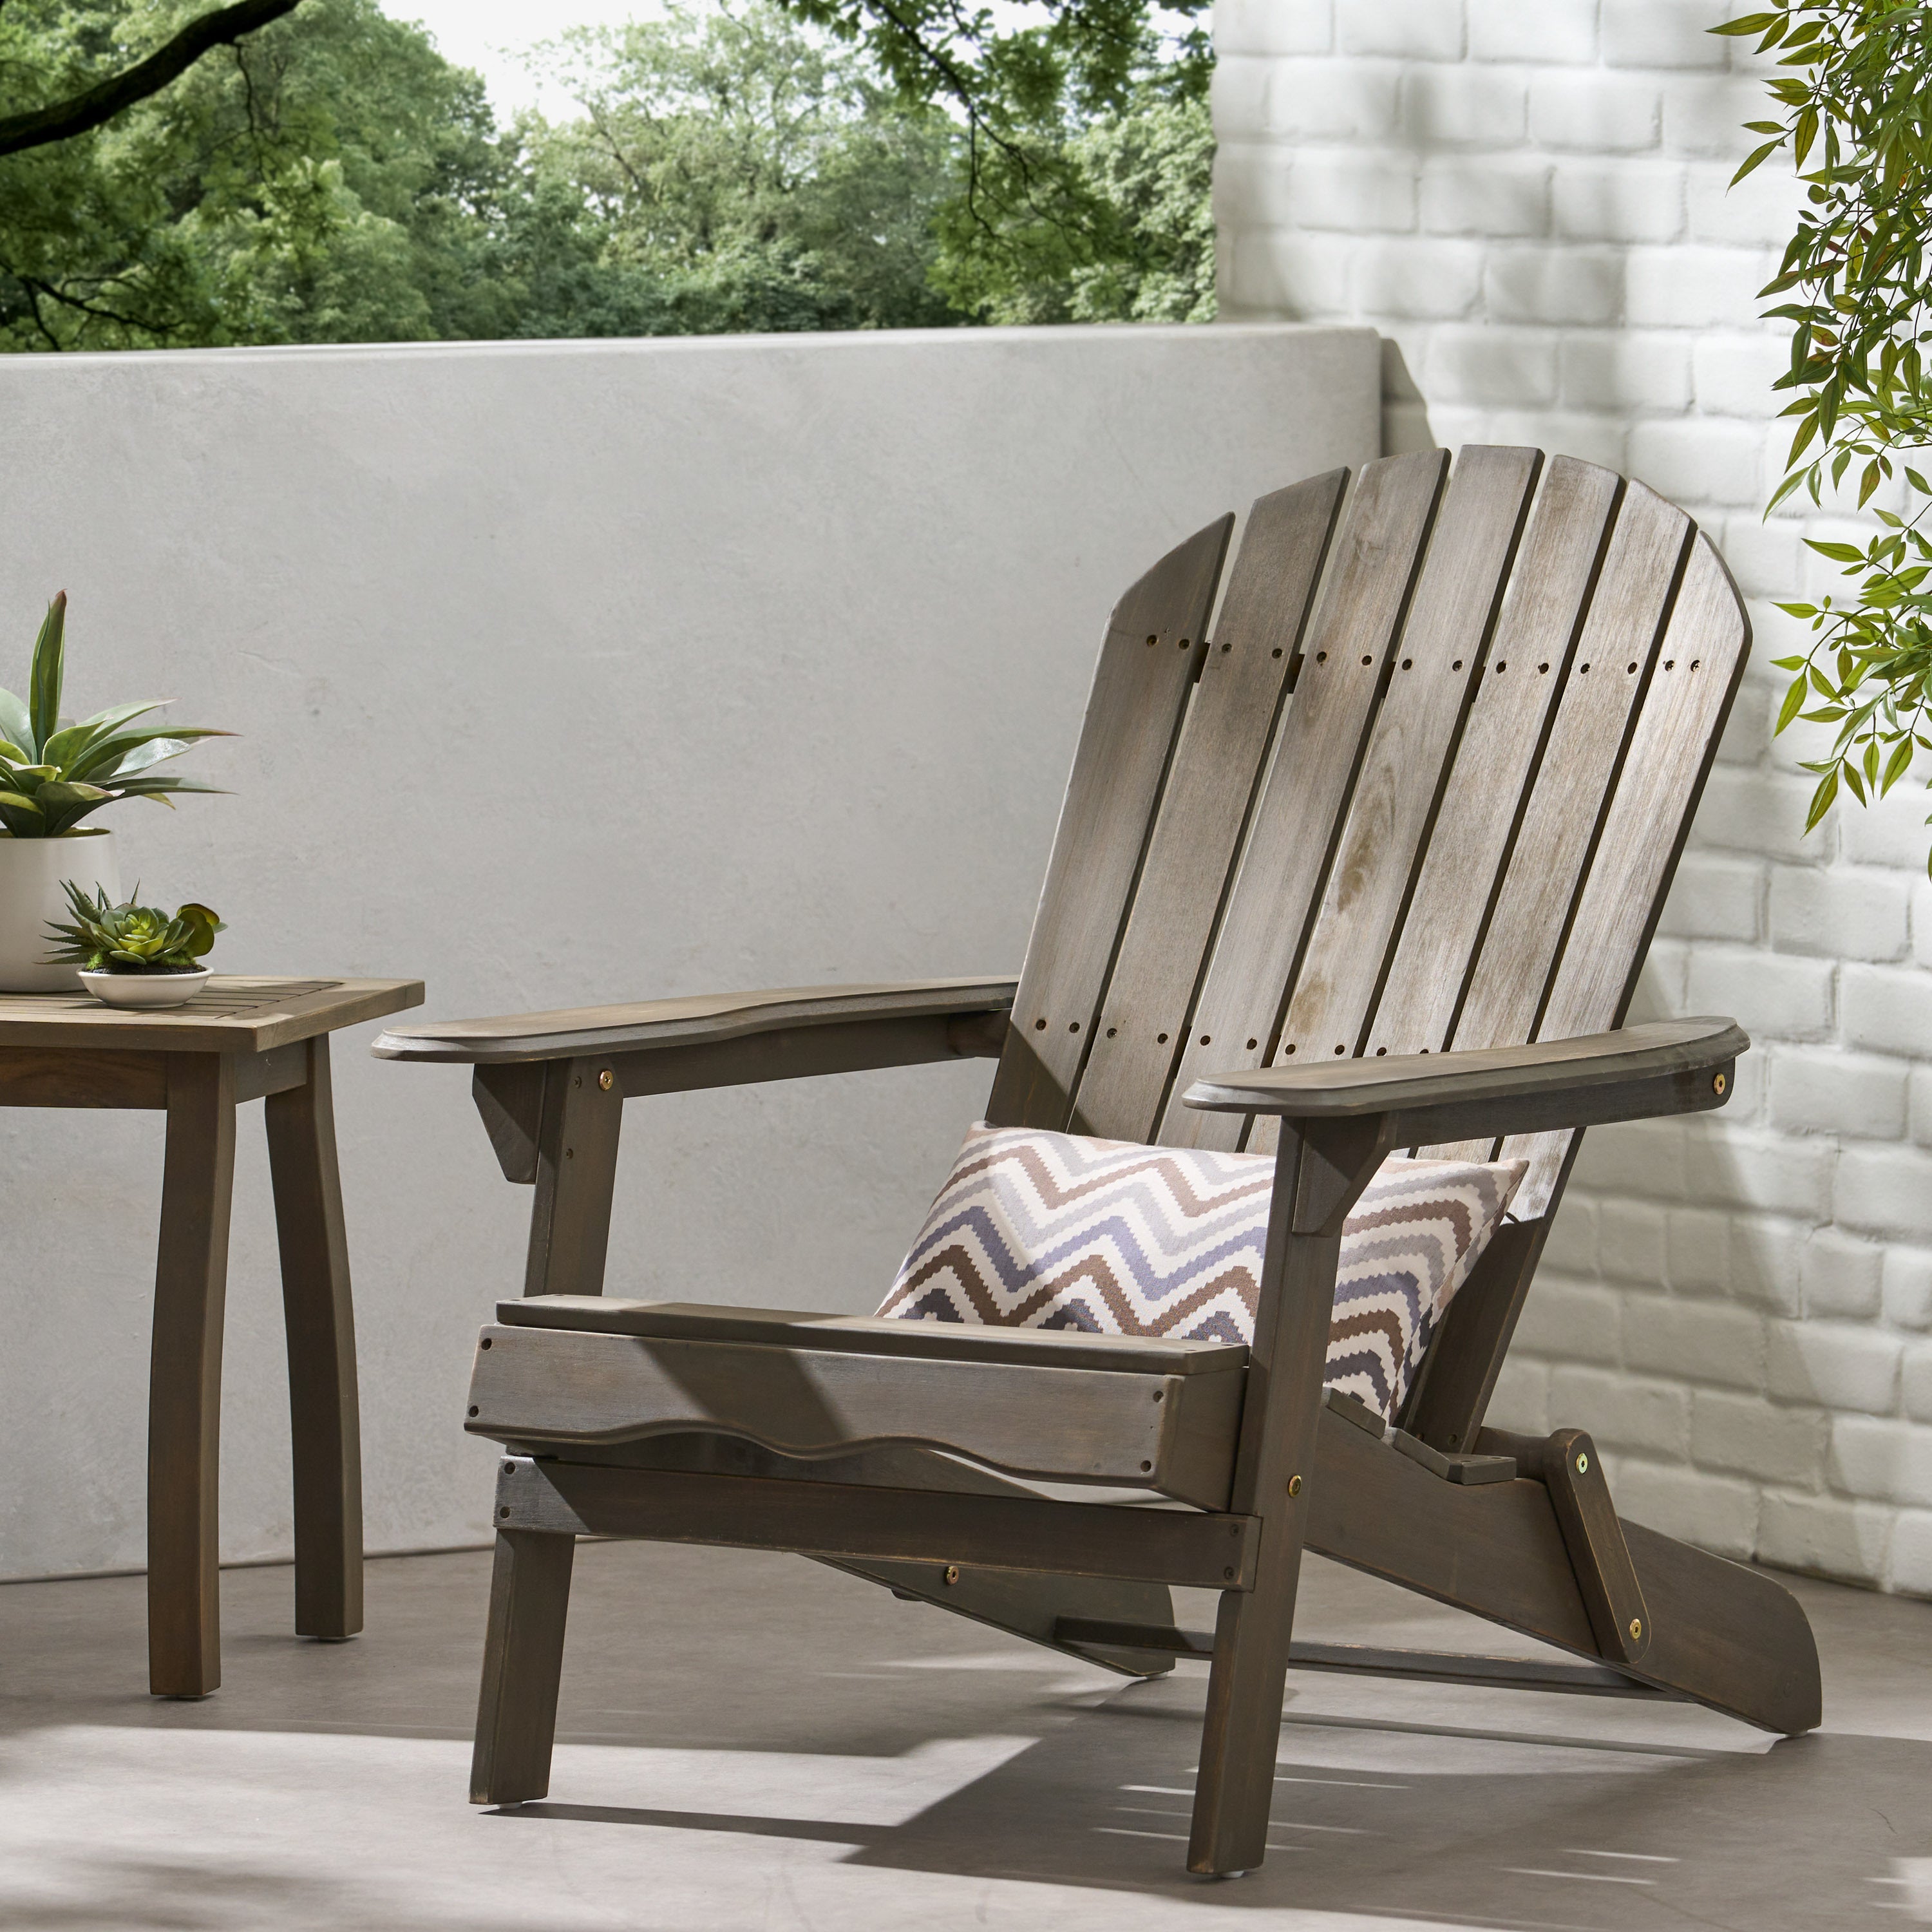 TM-HOME--ADIRONDACK-CHAIR-Outdoor-Chairs